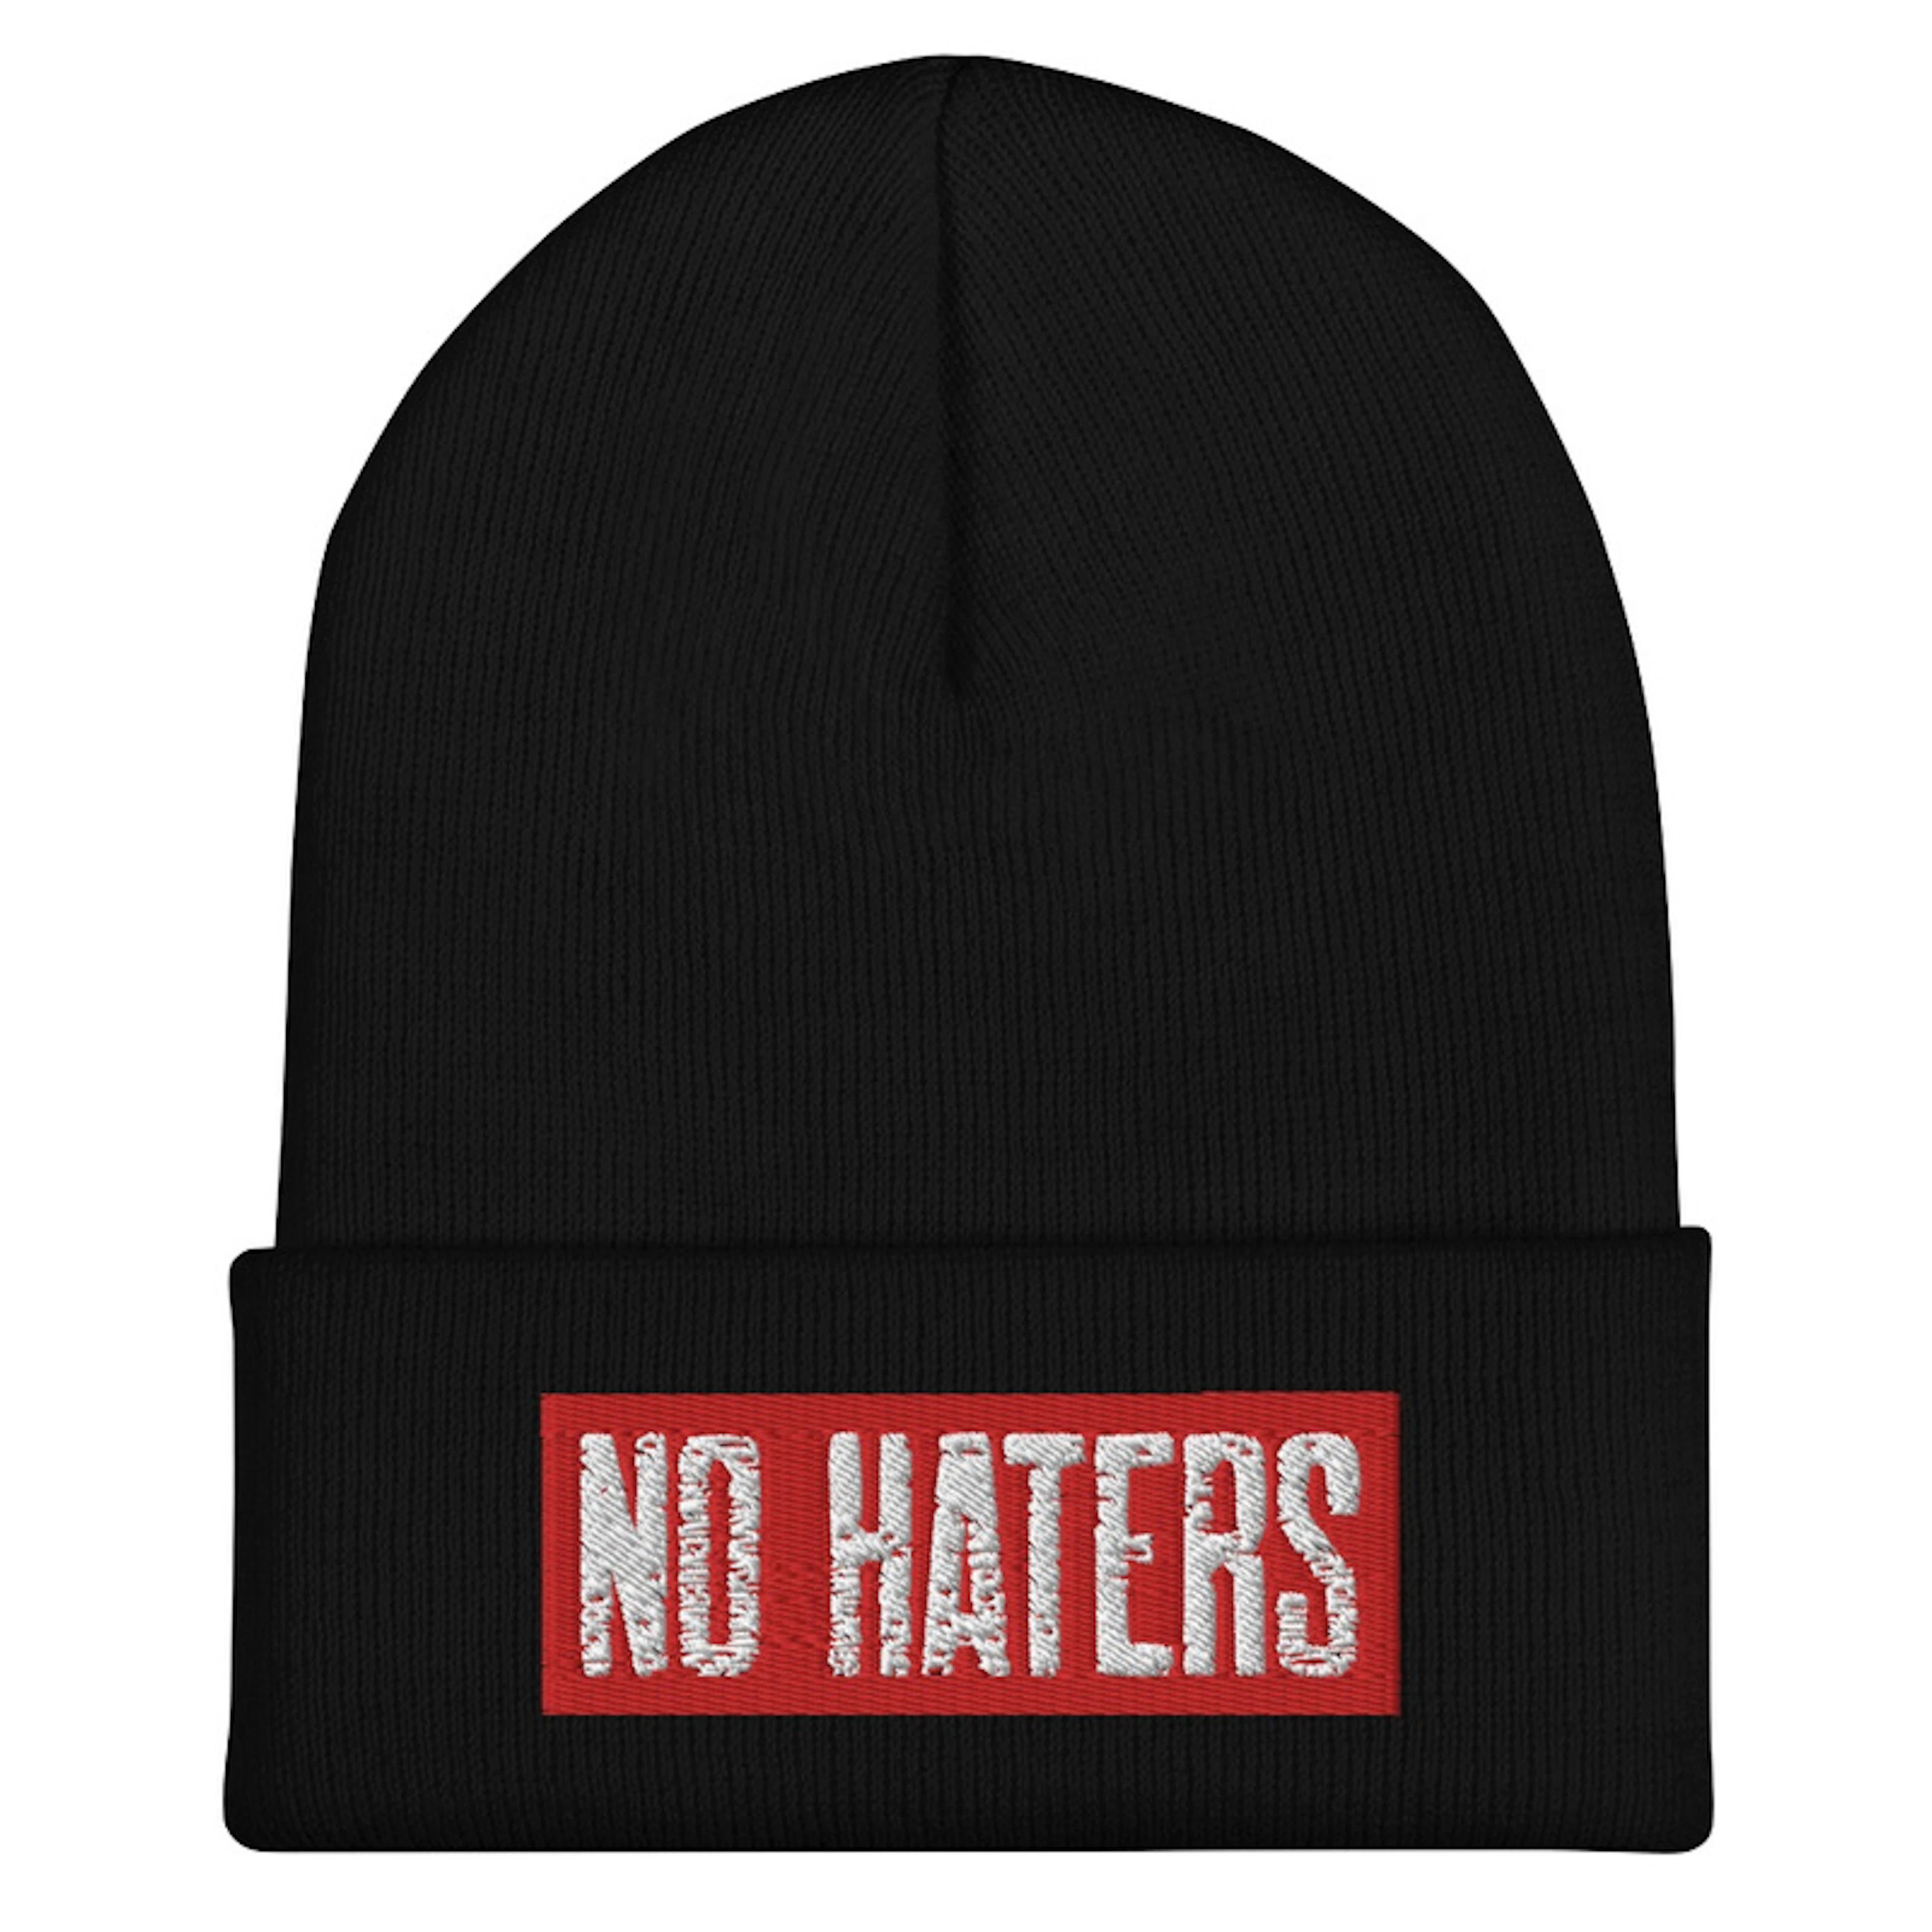 No Haters Beanie